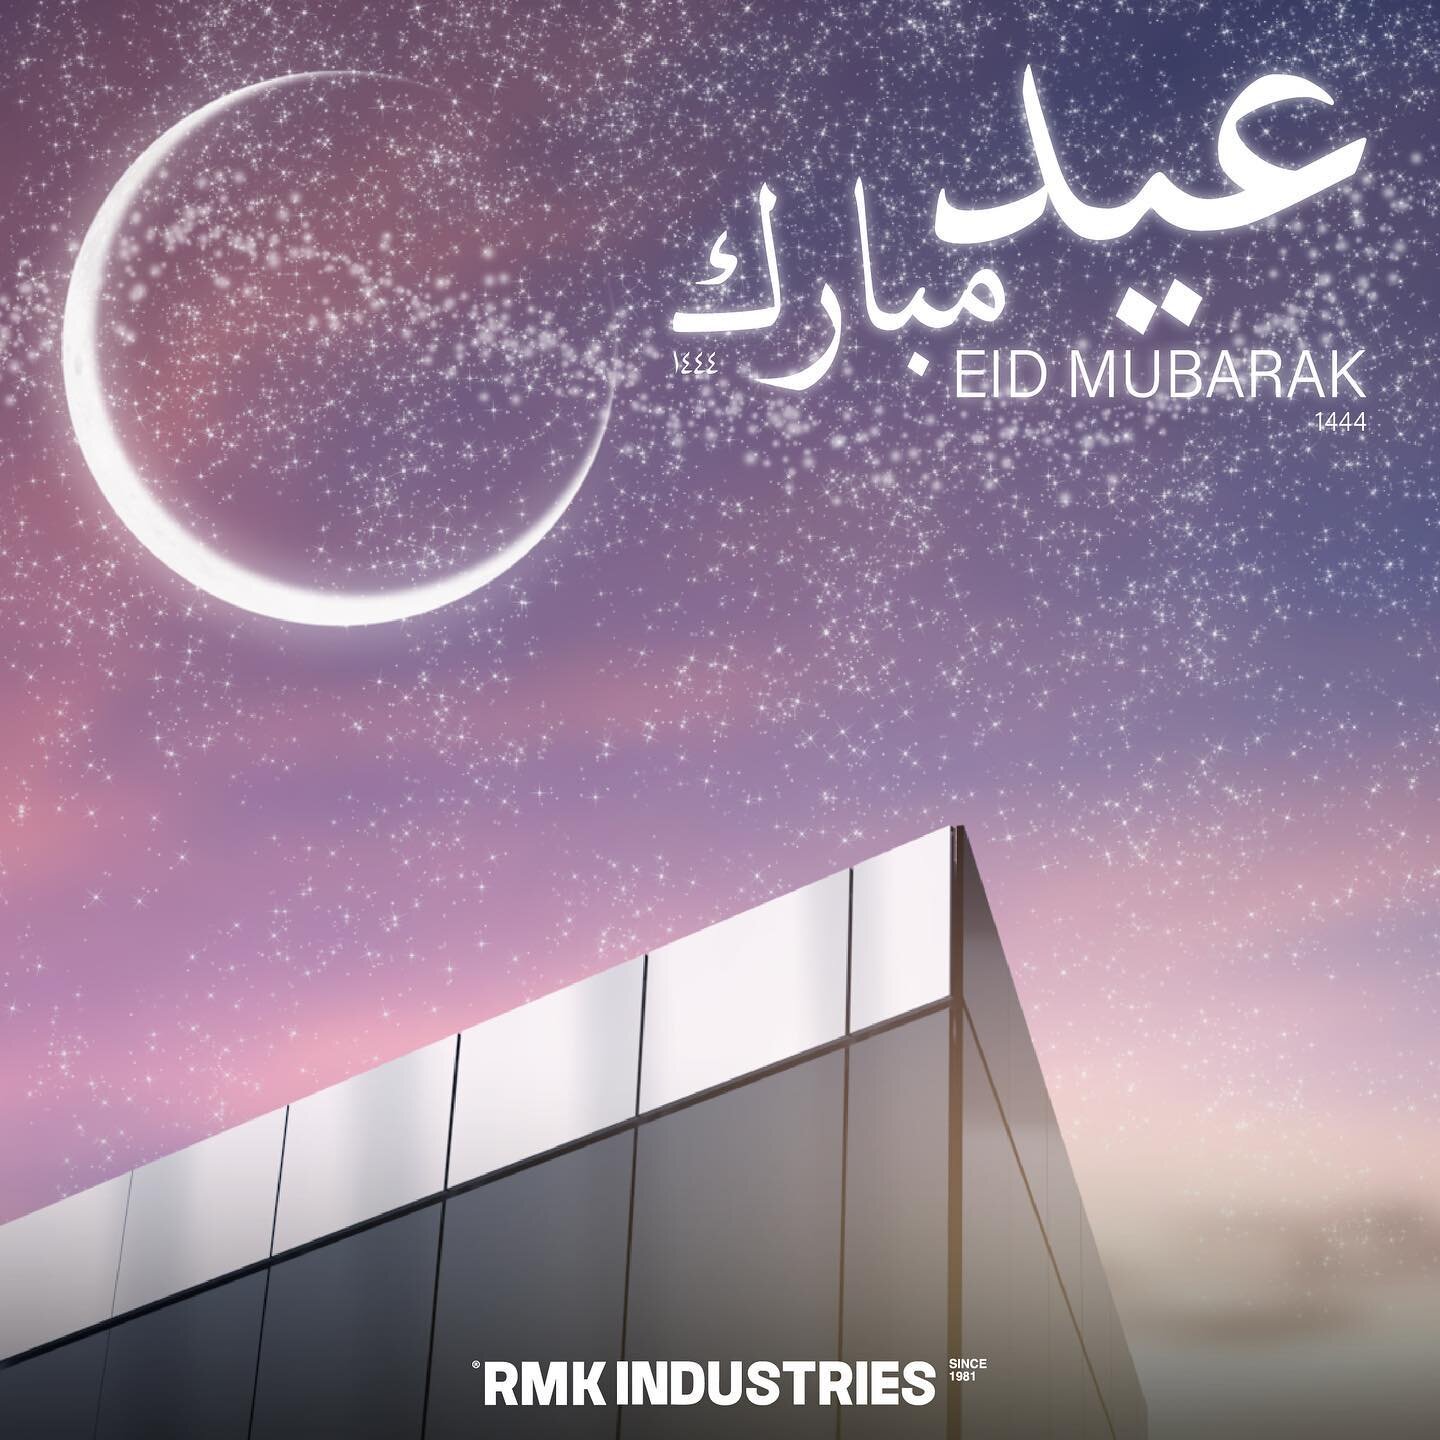 Eid Mubarak from all of us at RMK! We wish you peace, blessings and happiness.